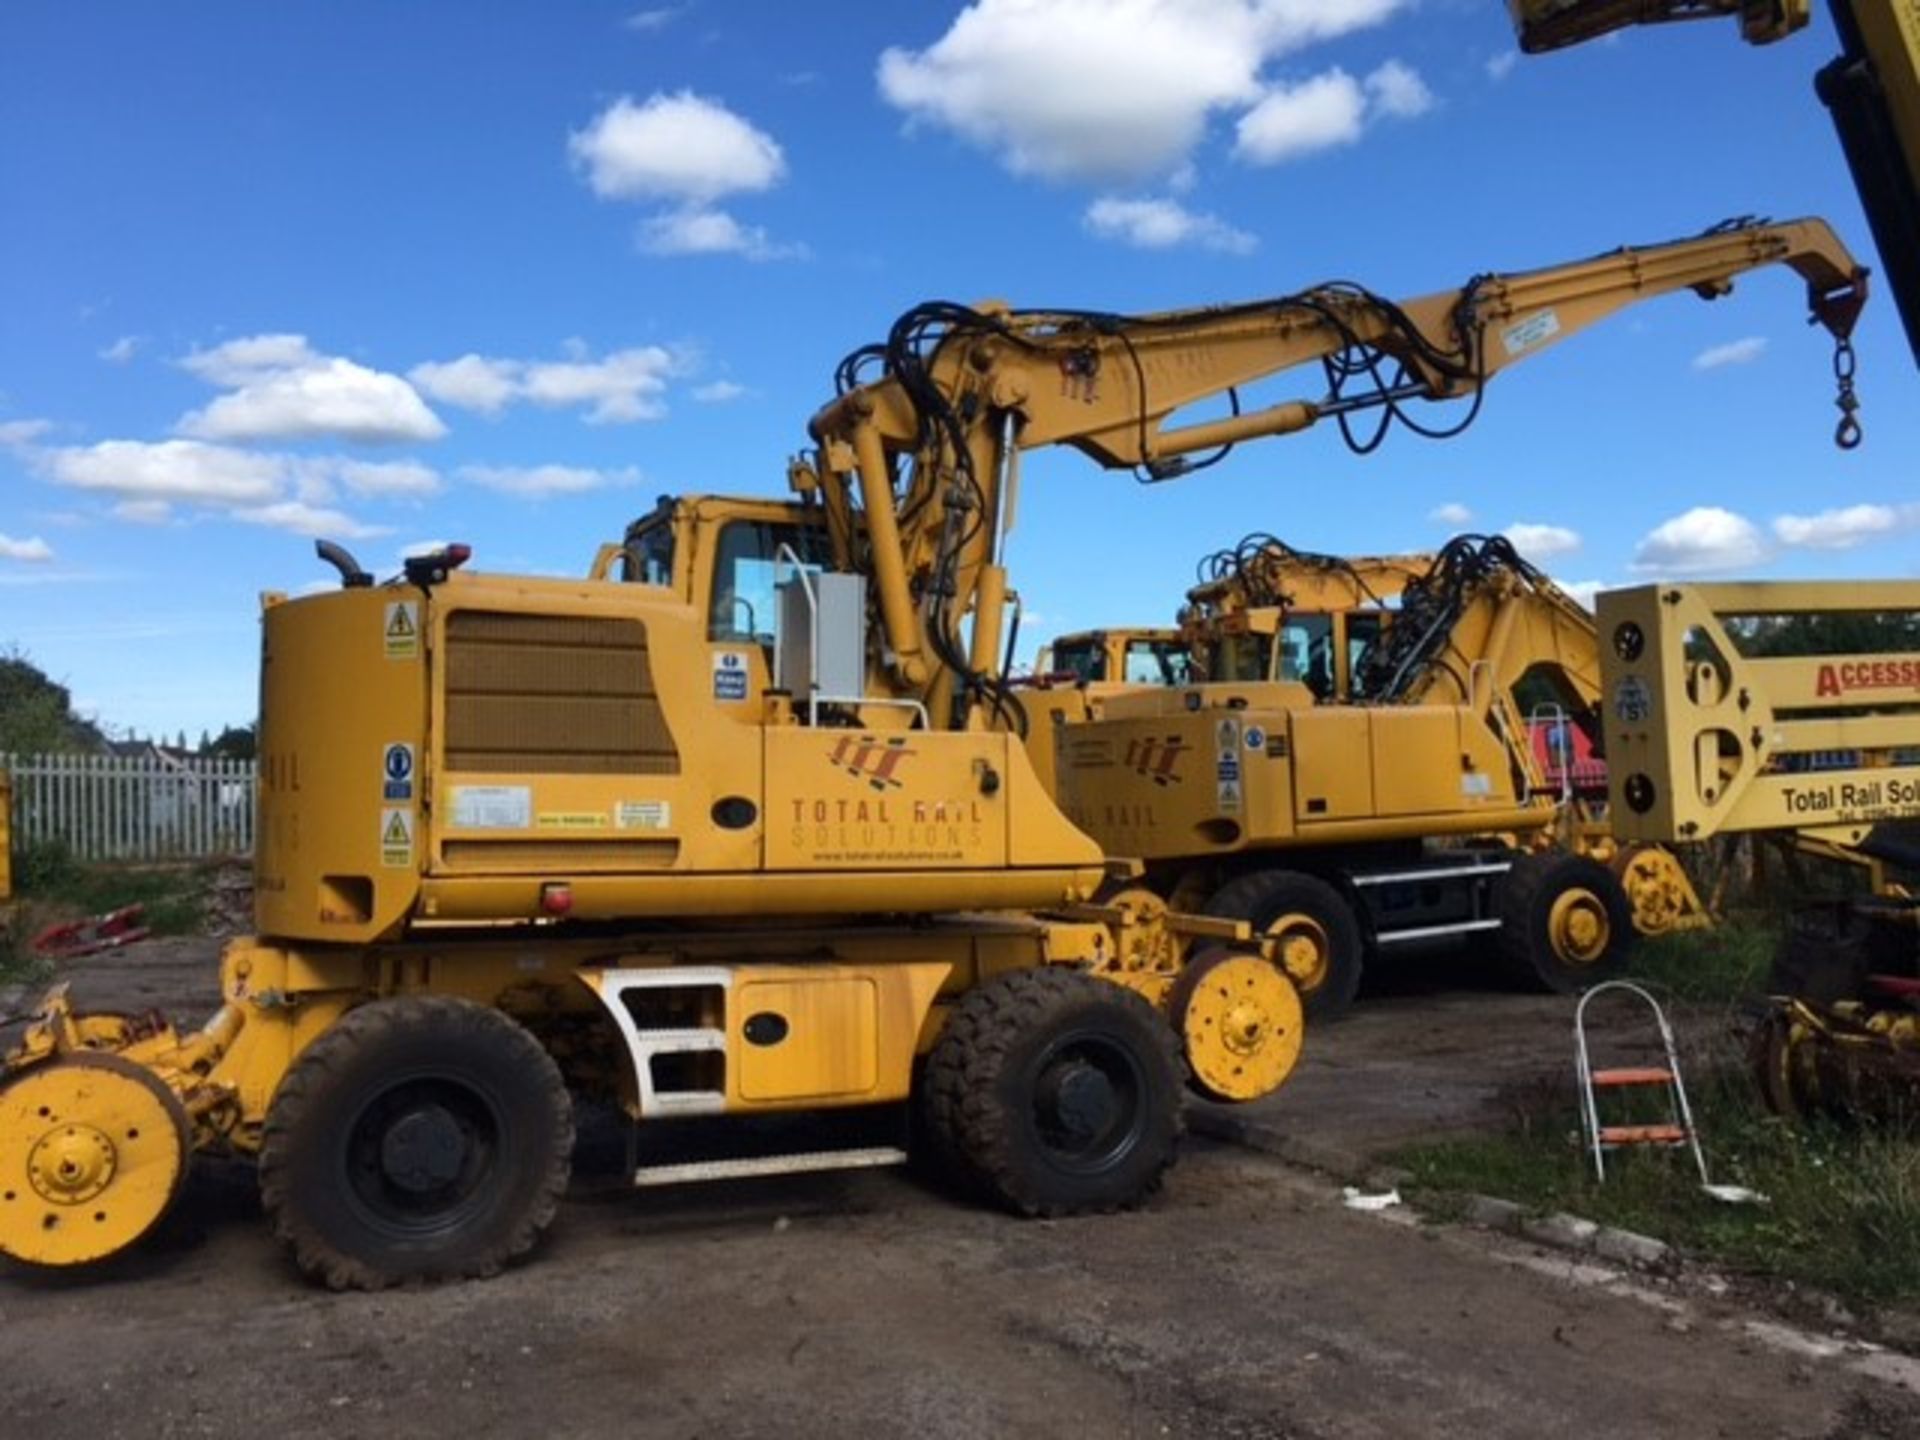 Case WX170 ROAD RAIL EXCAVATOR, serial no. CGG0232760, plant no. TRS1001, year of manufacture